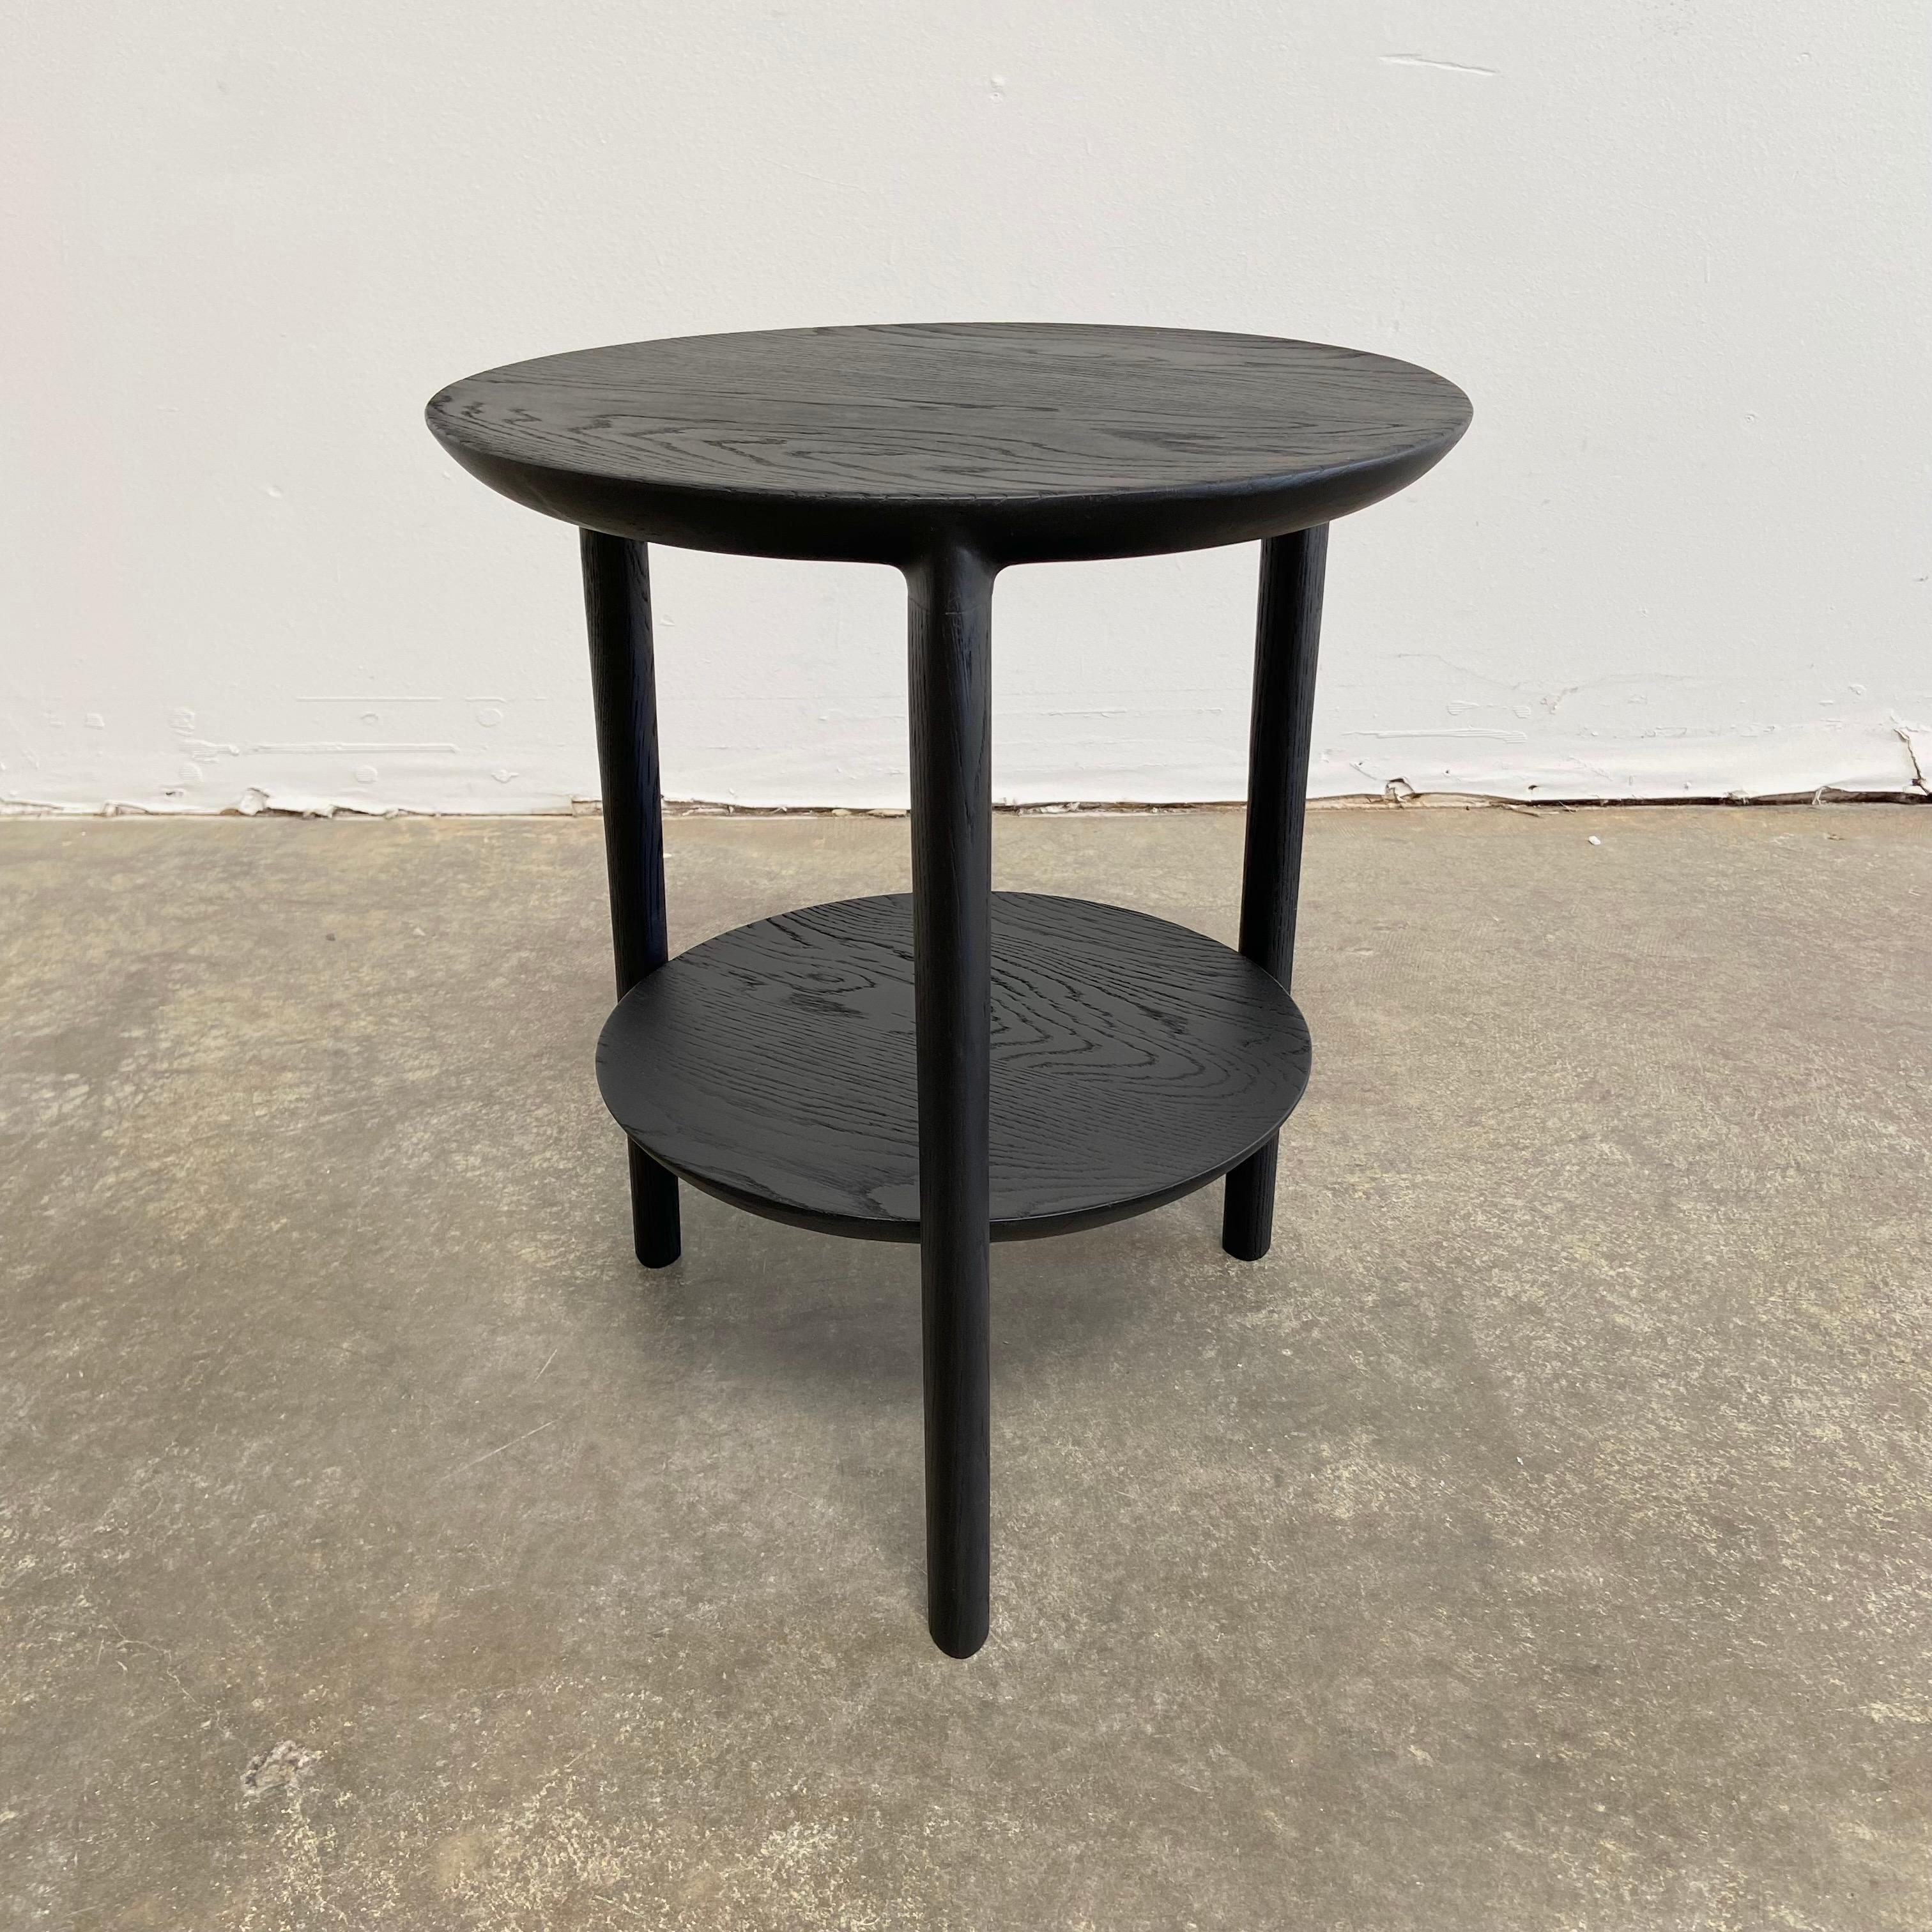 Oak black side table
The side table was designed to attract attention without diverting it from the items you choose to display on it. From art to books or plants, with the oak side table, your object of choice has found its stage.
Installed